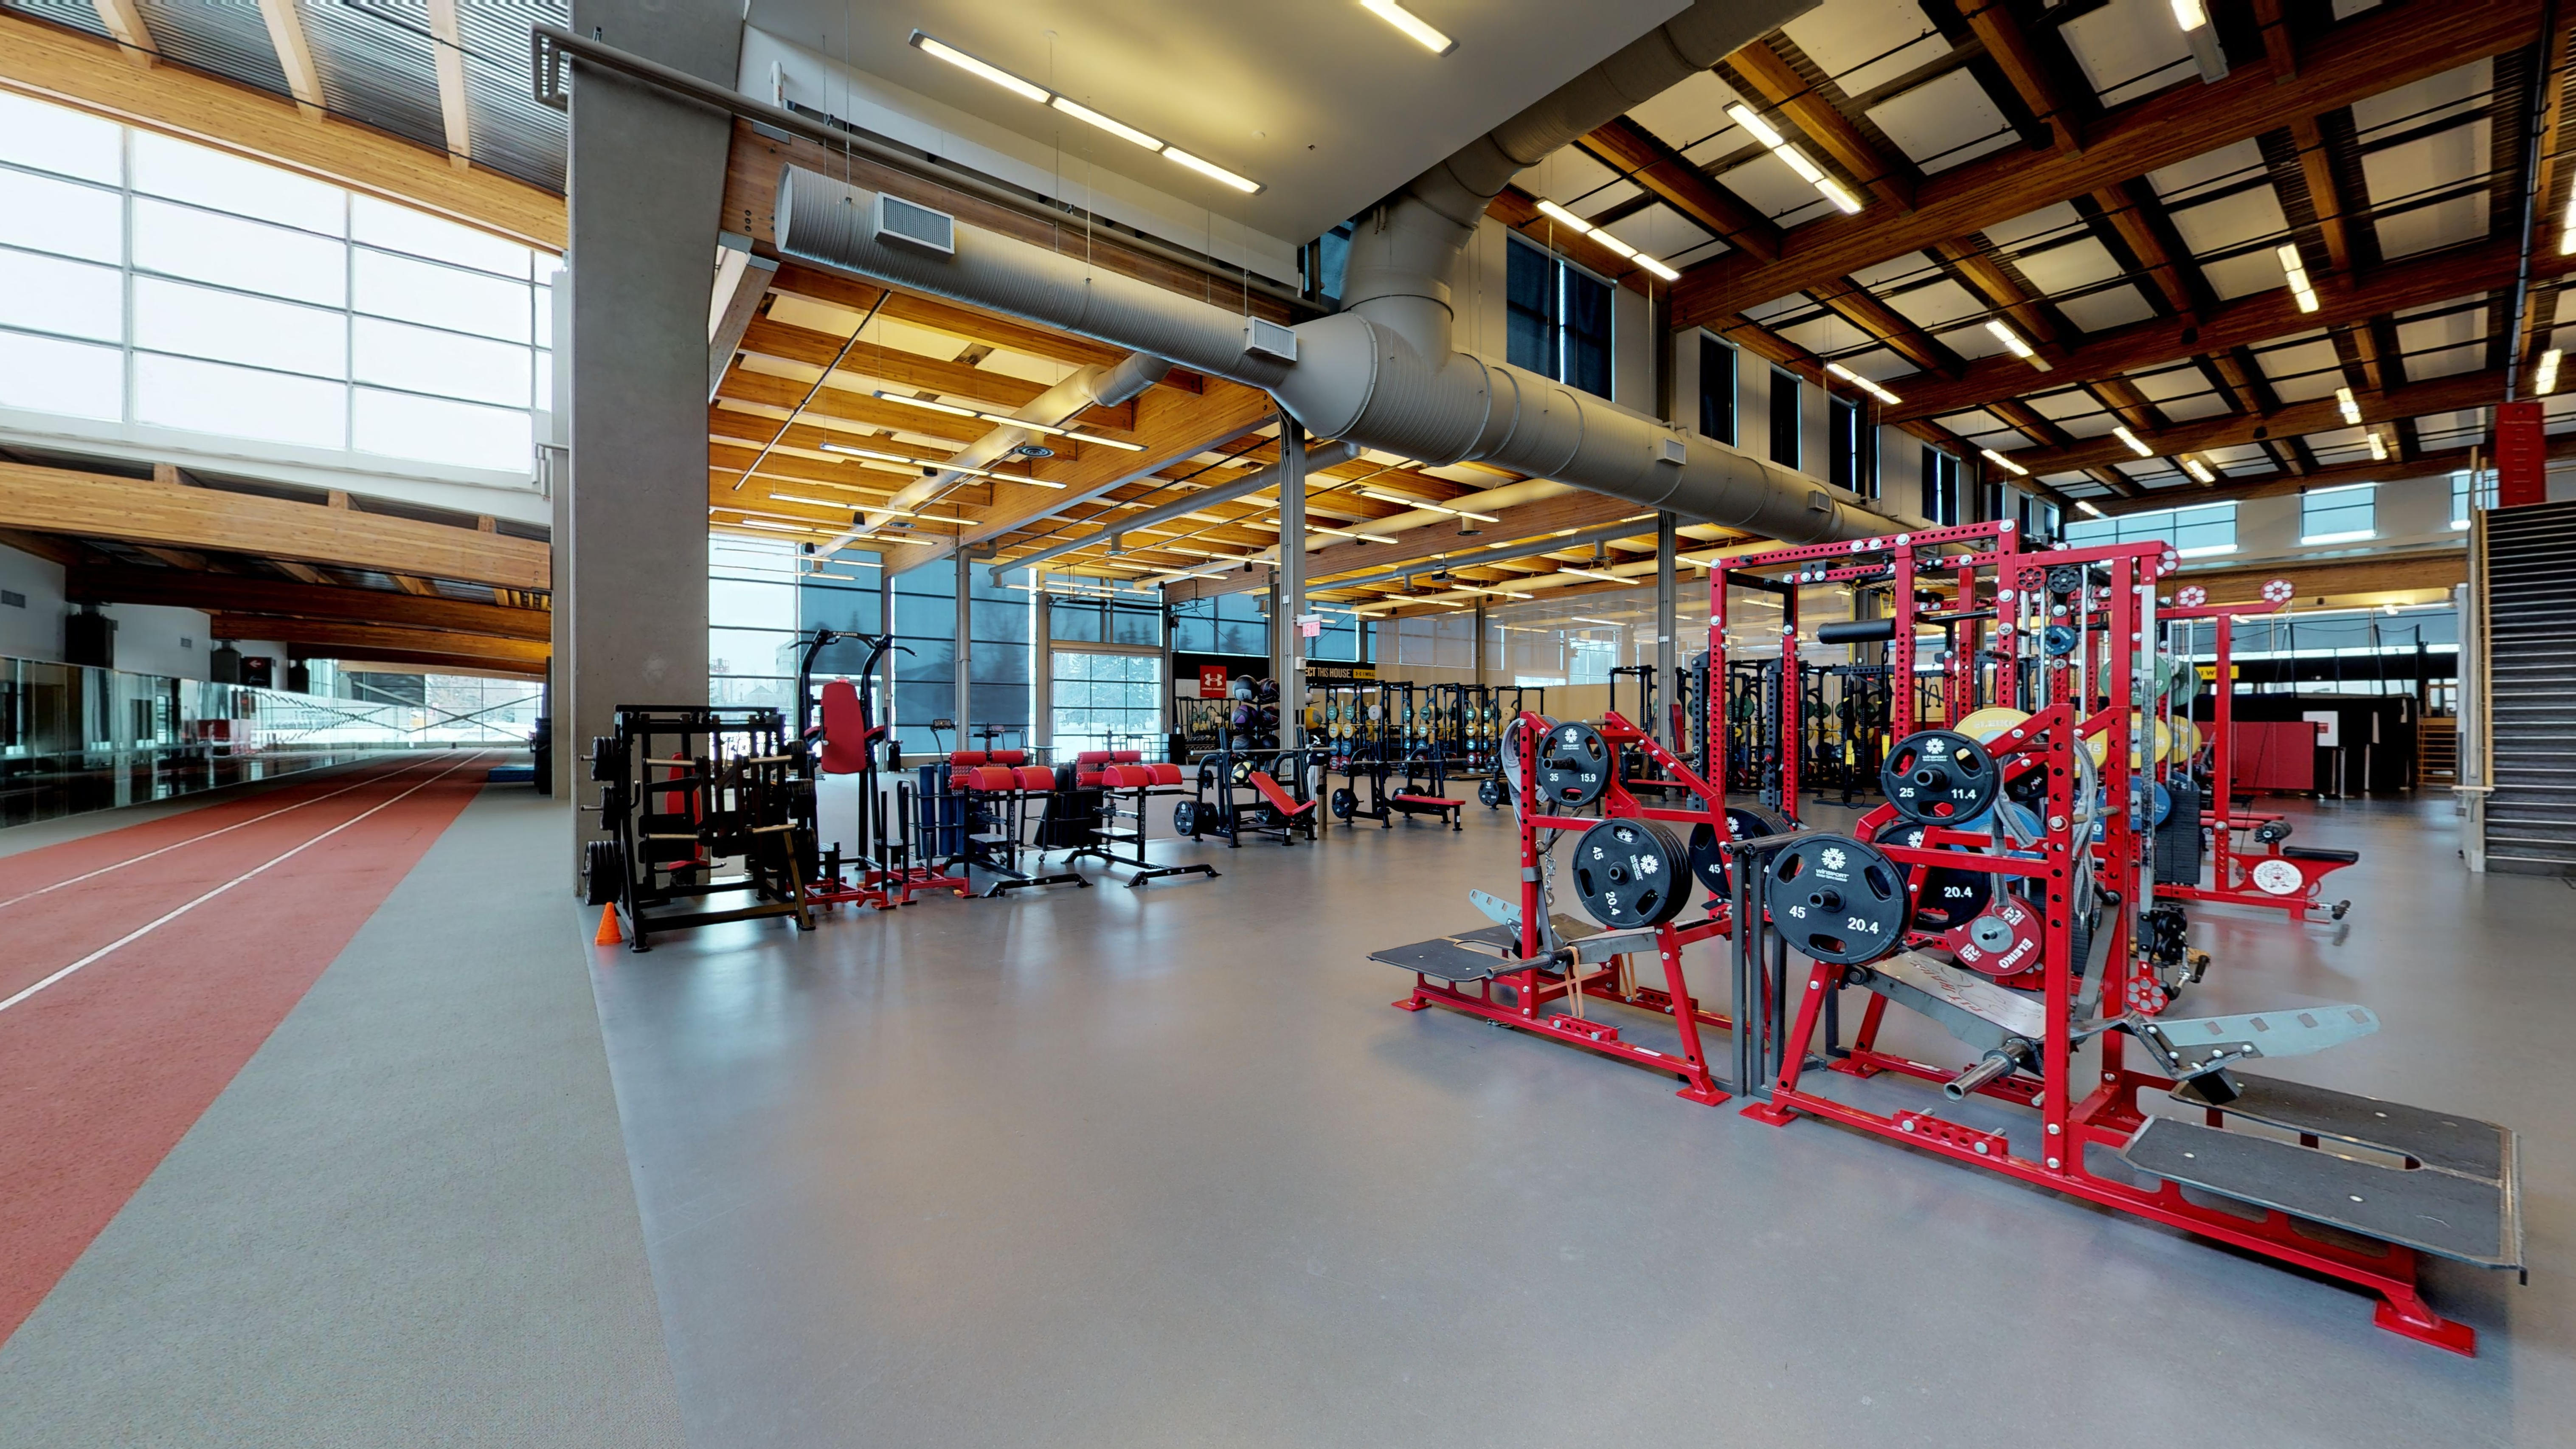 Team Canada training facilities to be outfitted with antimicrobial copper to enhance safety